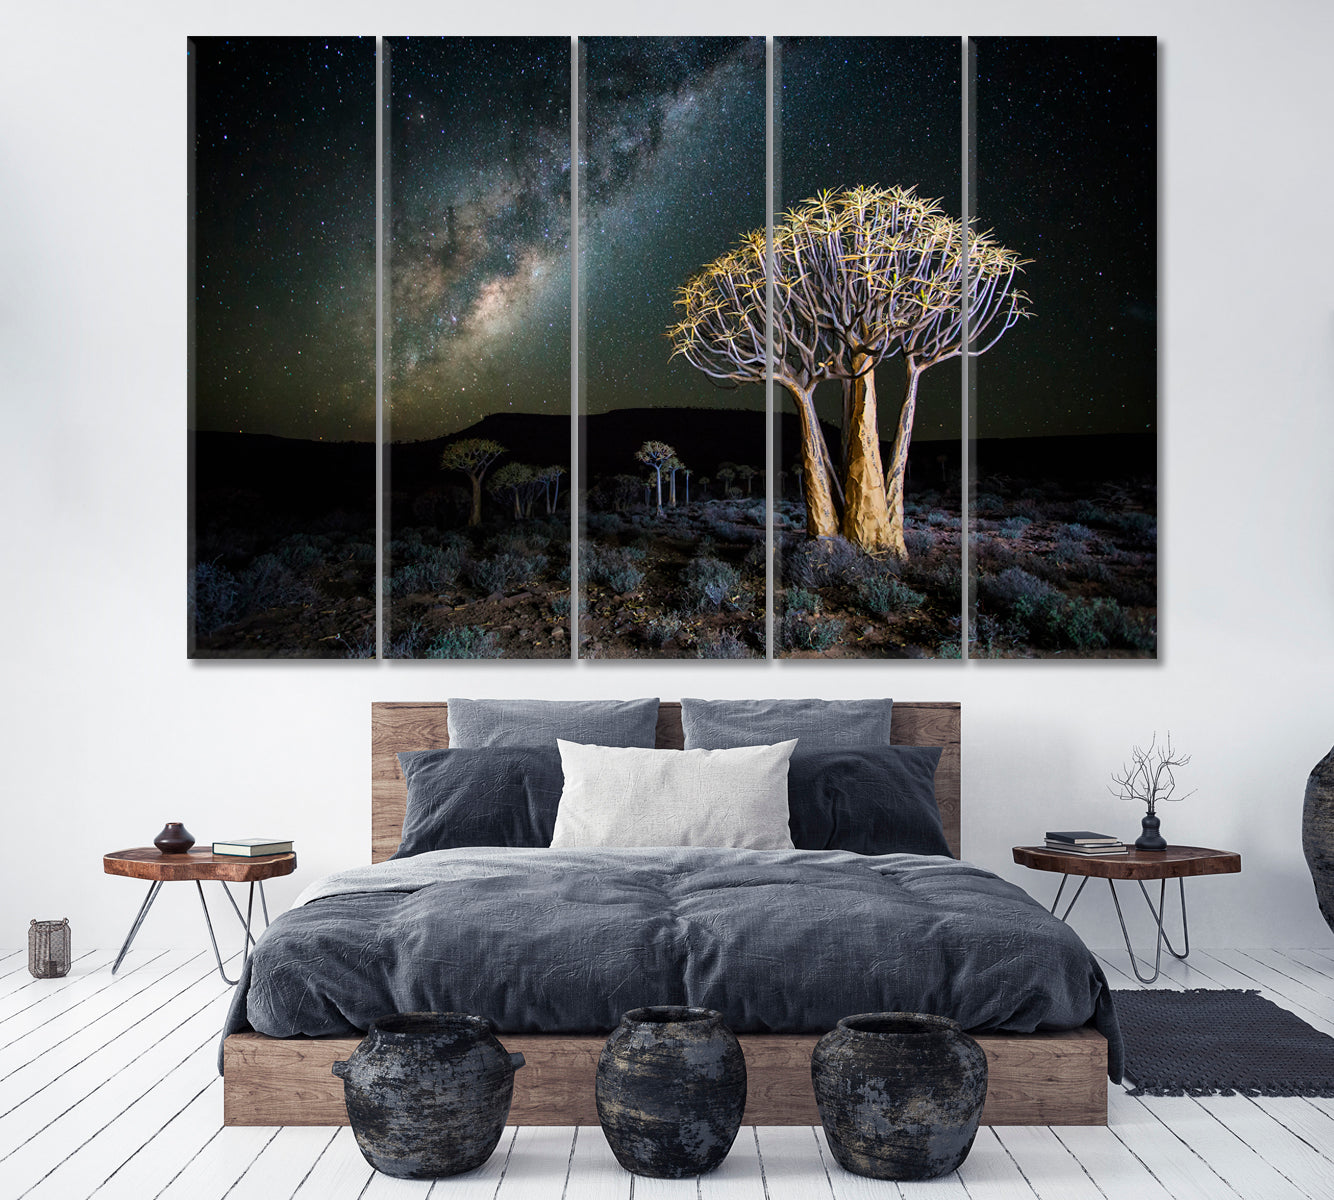 Milky Way over Quiver Tree Forest South Africa Canvas Print ArtLexy 5 Panels 36"x24" inches 